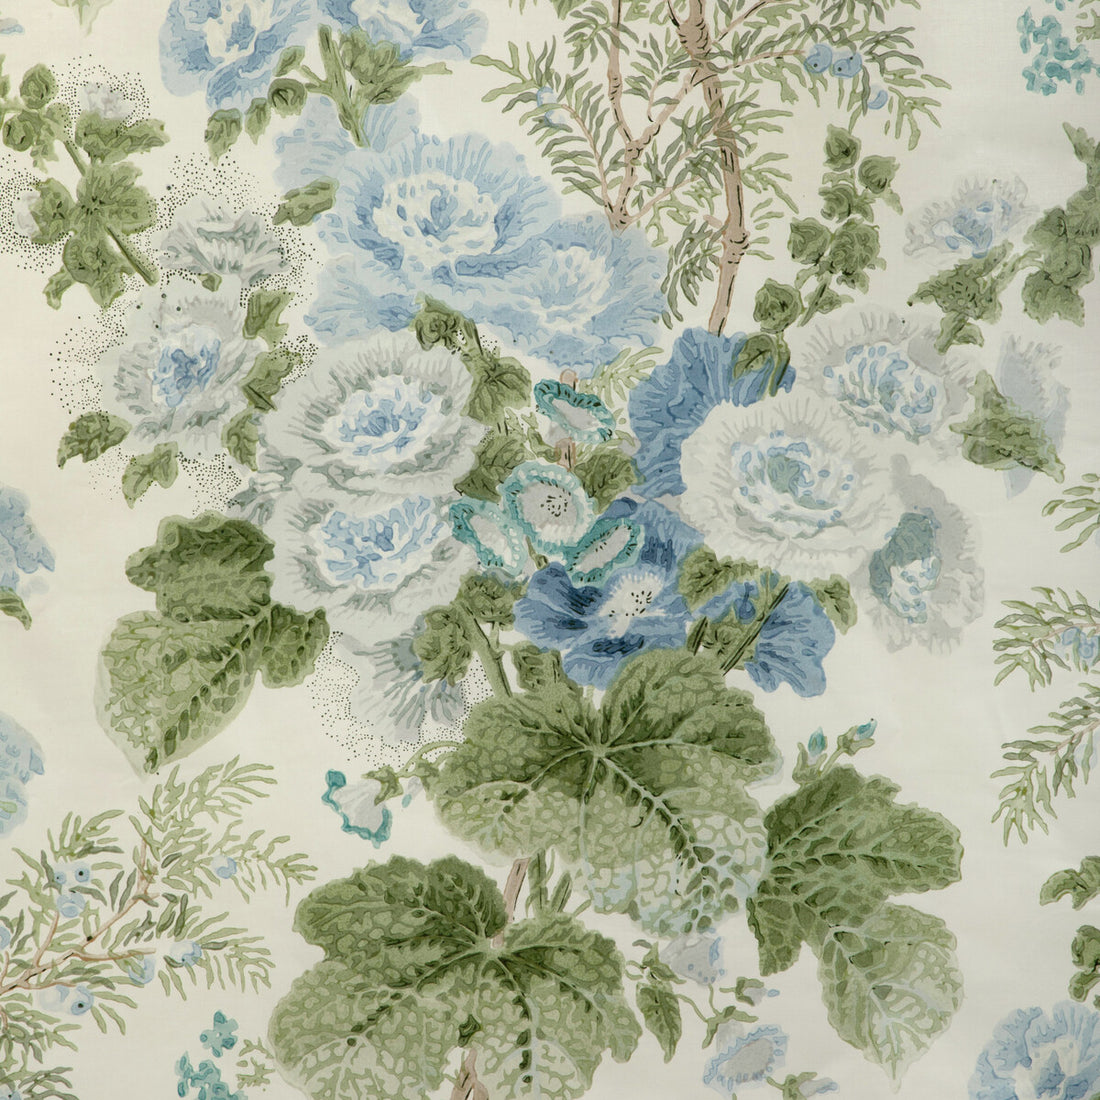 Hollyhock Hdb fabric in blue/leaf color - pattern 2005100.153.0 - by Lee Jofa in the Lee Jofa 200 collection